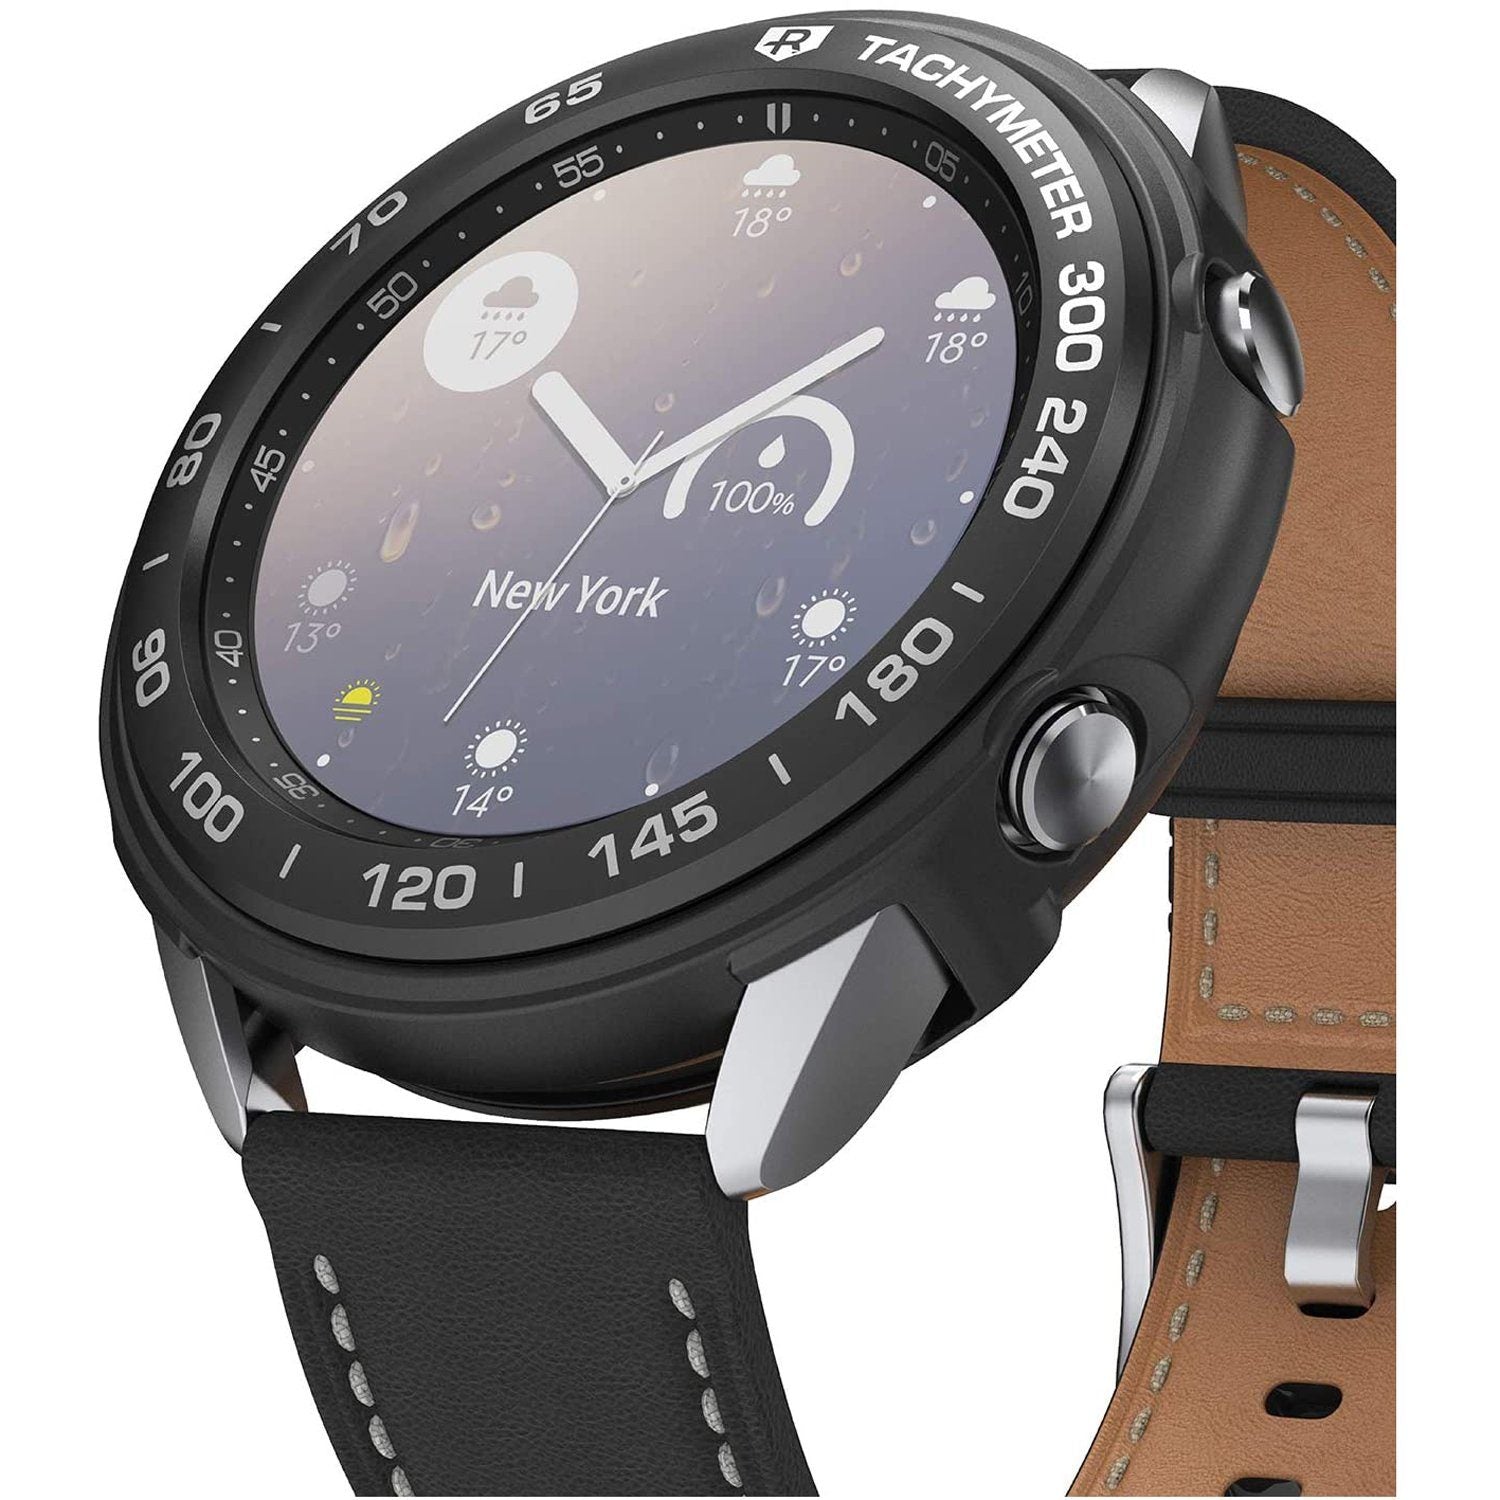 Ringke Air Sports + Bezel Styling Combo Pack for Samsung Galaxy Watch 3